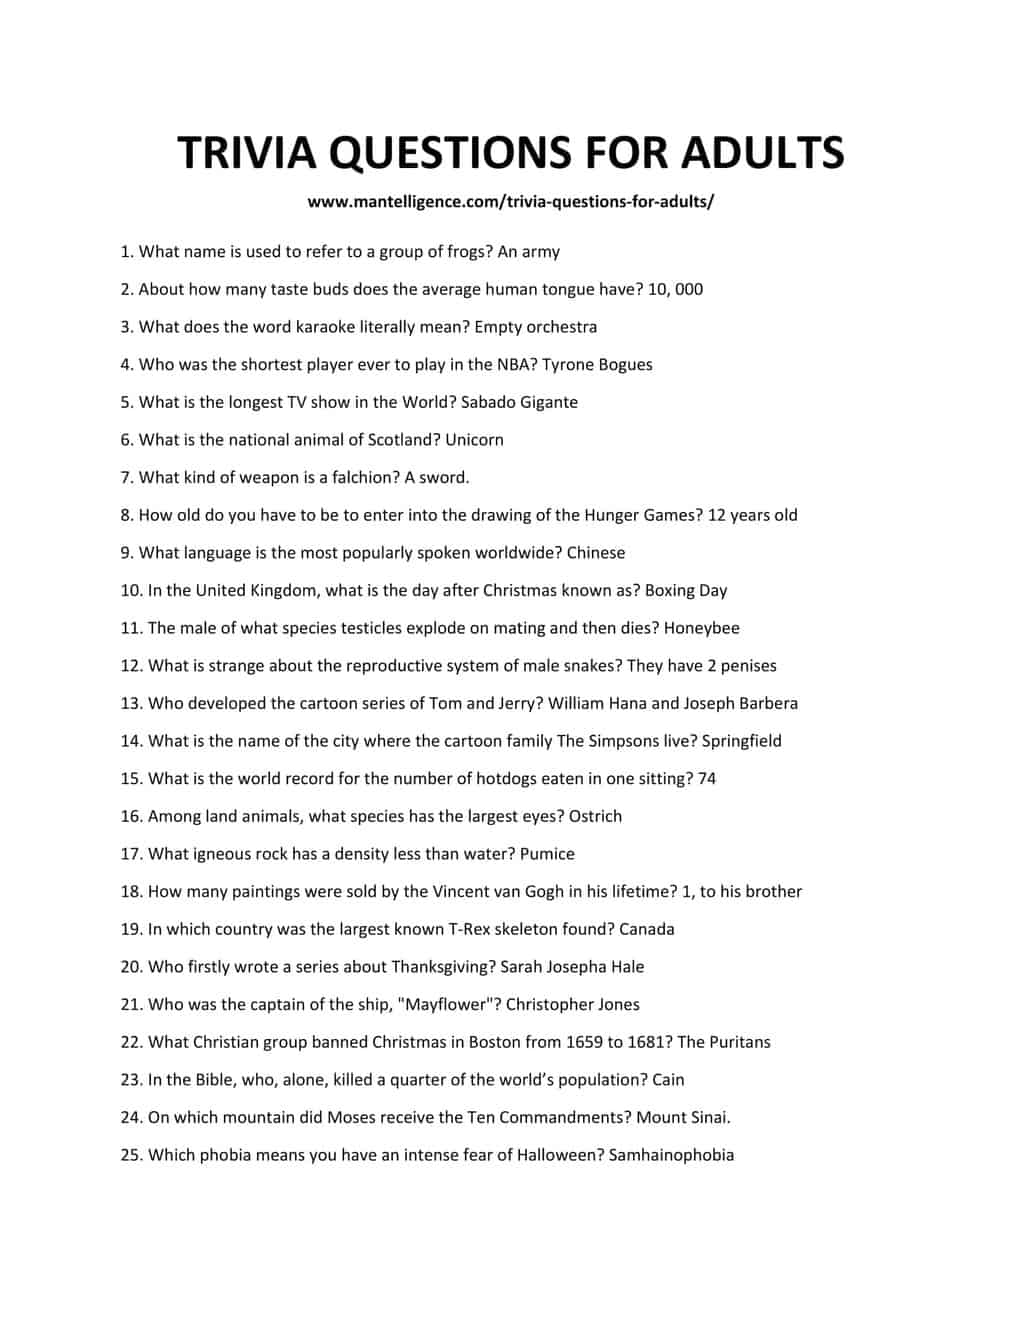 List-of-trivia-questions-for-adults. Jpg